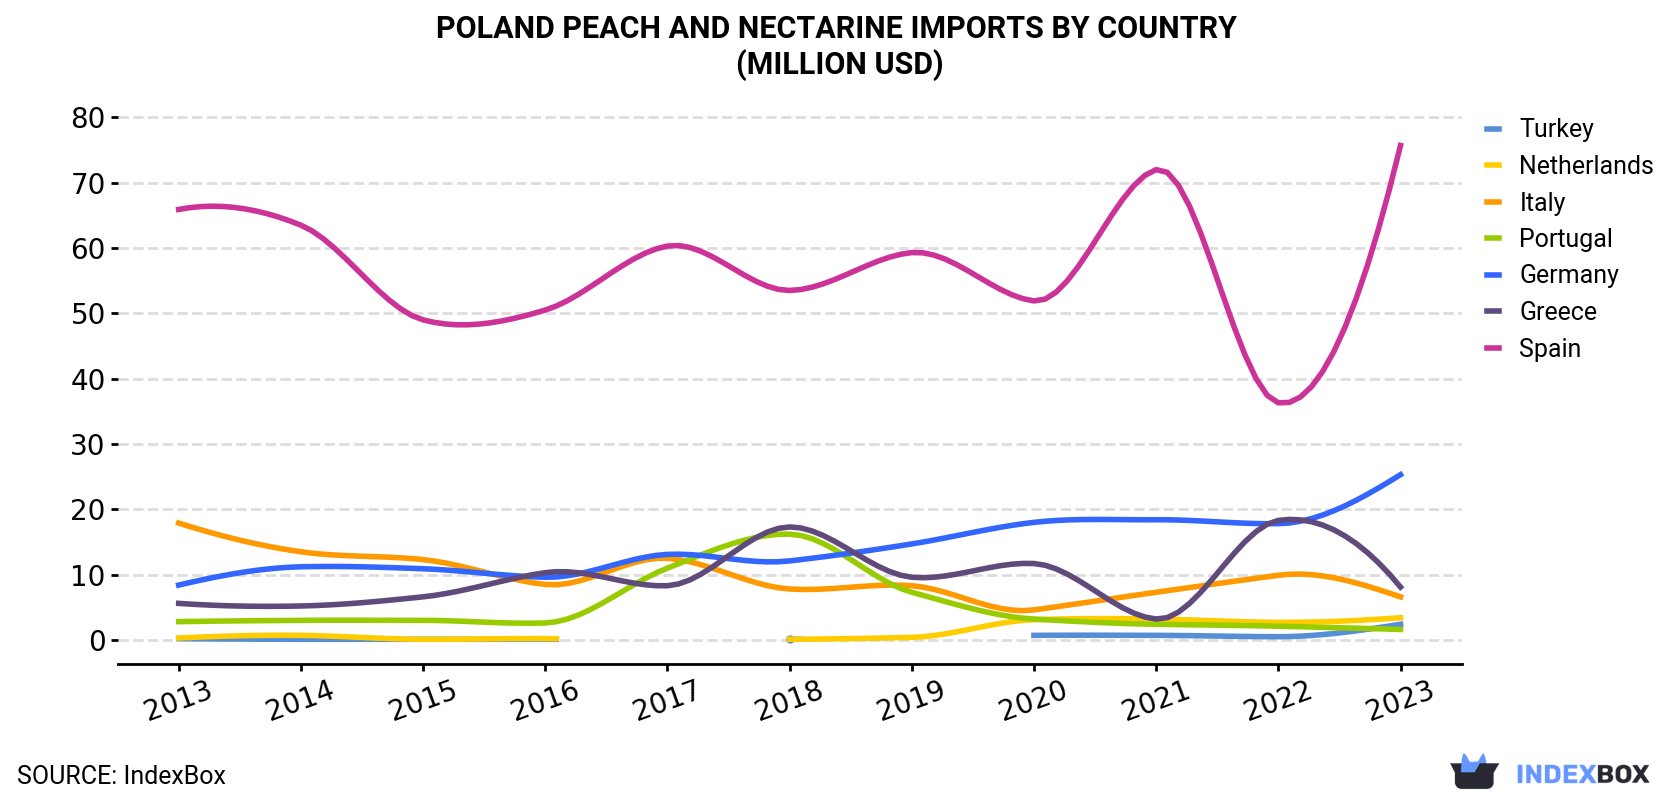 Poland Peach And Nectarine Imports By Country (Million USD)